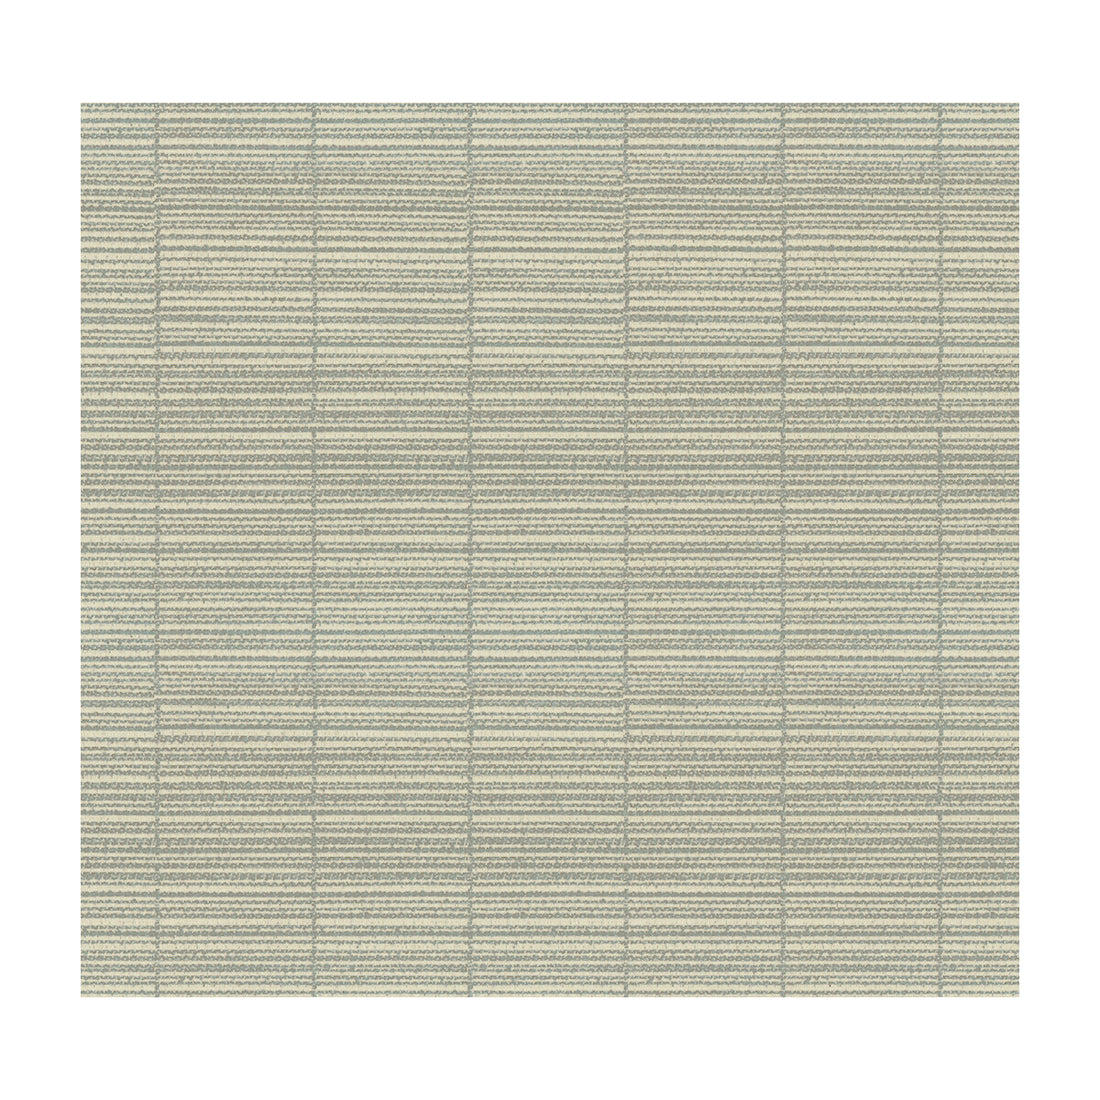 Dune fabric in dove color - pattern GWF-3421.11.0 - by Lee Jofa Modern in the Kelly Wearstler Terra Firma Textiles collection